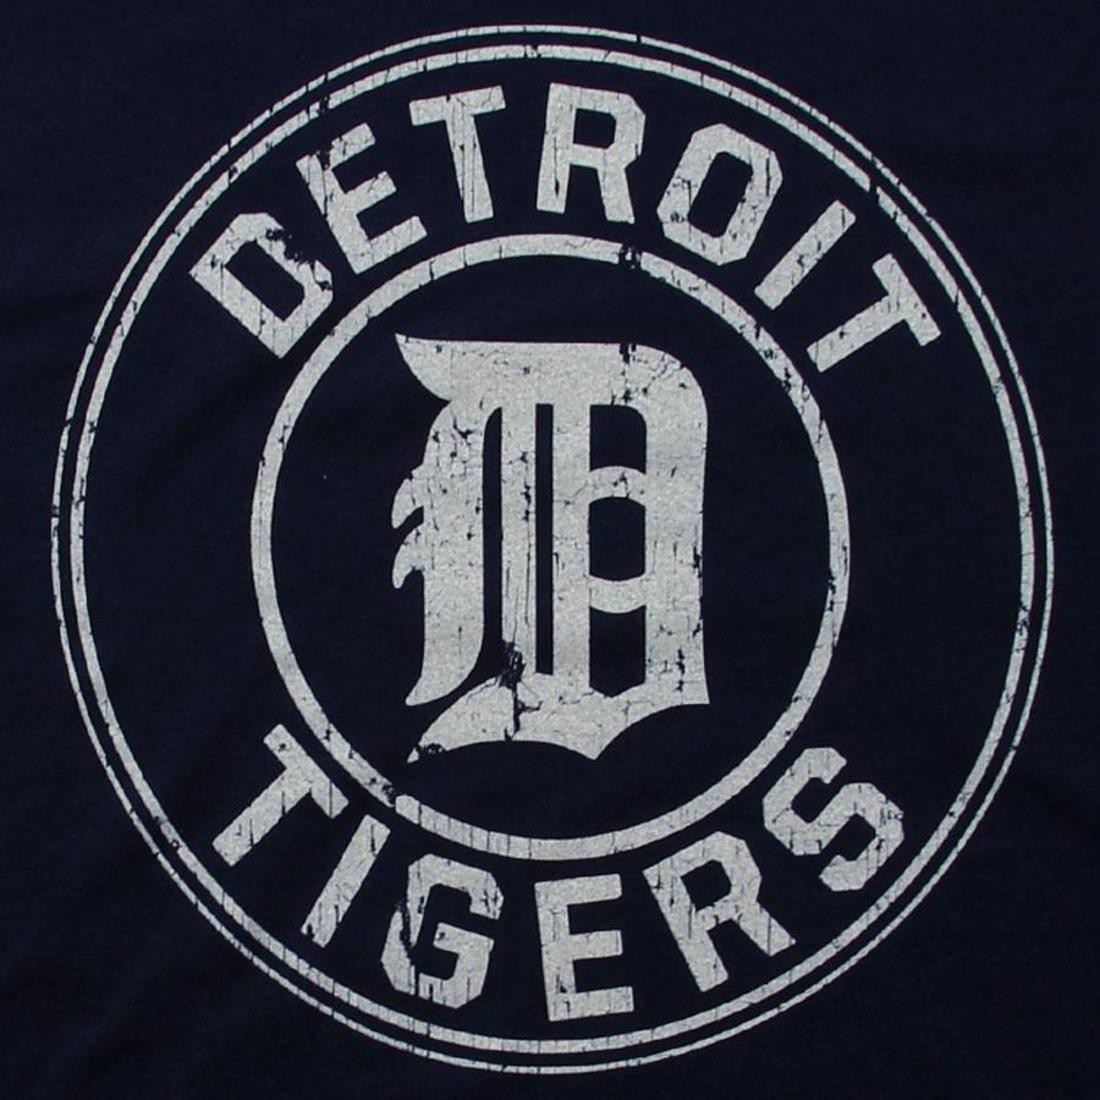 Mitchell And Ness Detroit Tigers Blank Tee (navy)